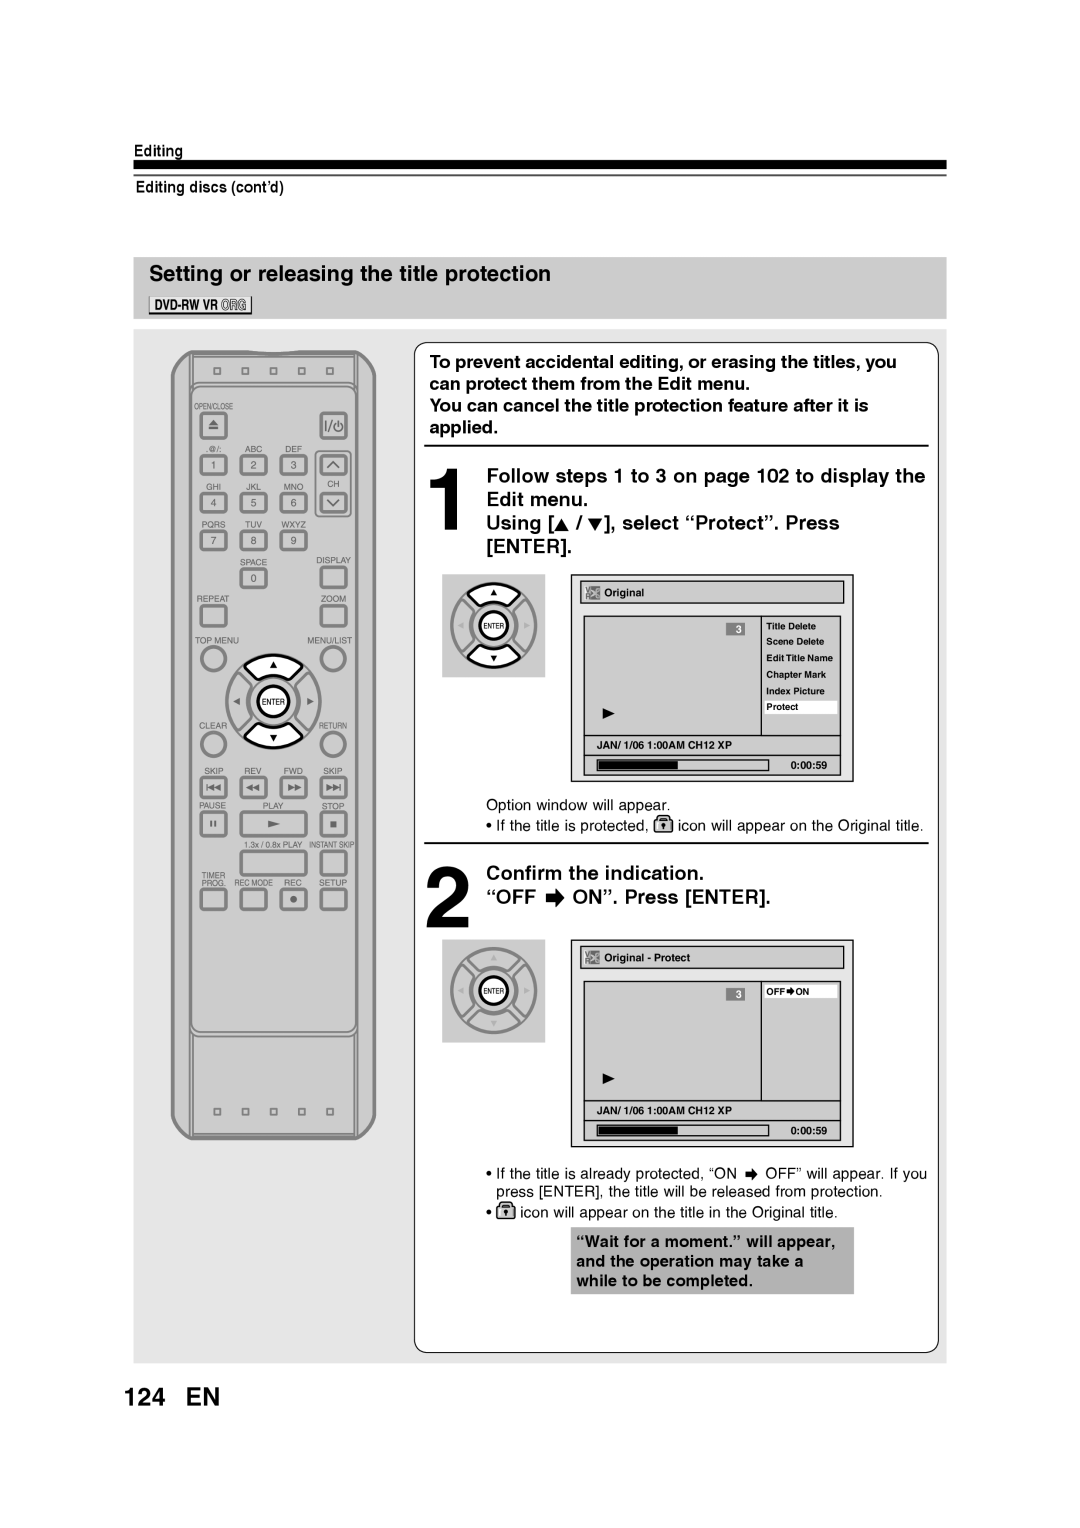 Toshiba D-RW2SU/D-RW2SC 124 EN, Setting or releasing the title protection, Using K / L, select “Protect”. Press ENTER 